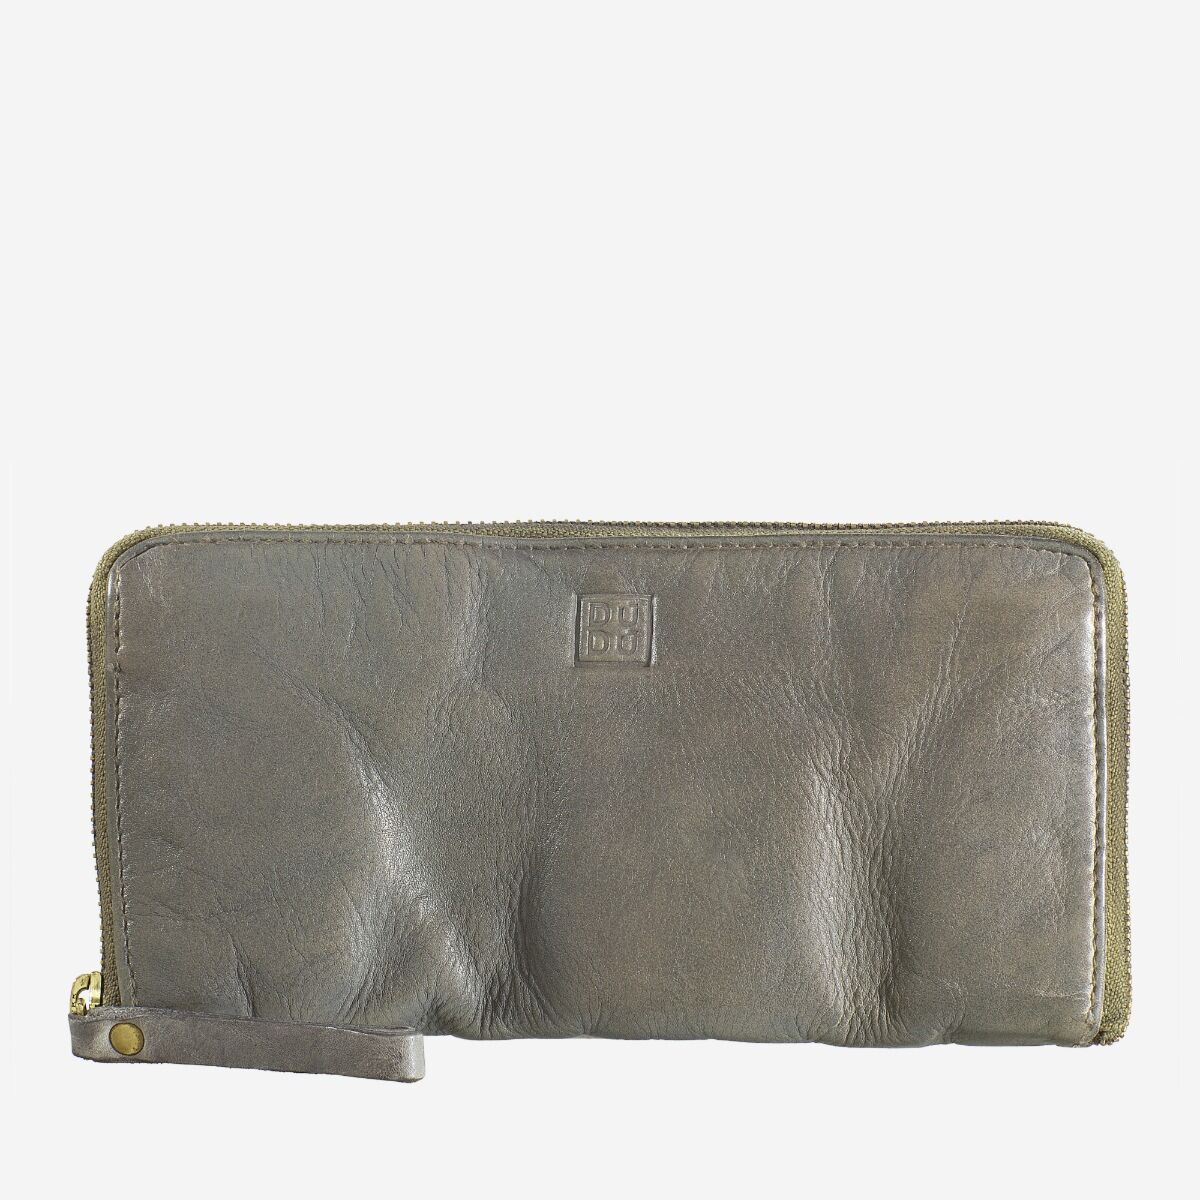 DuDu Woman's Hand-Made Soft Leather Wallet - Ash Gray